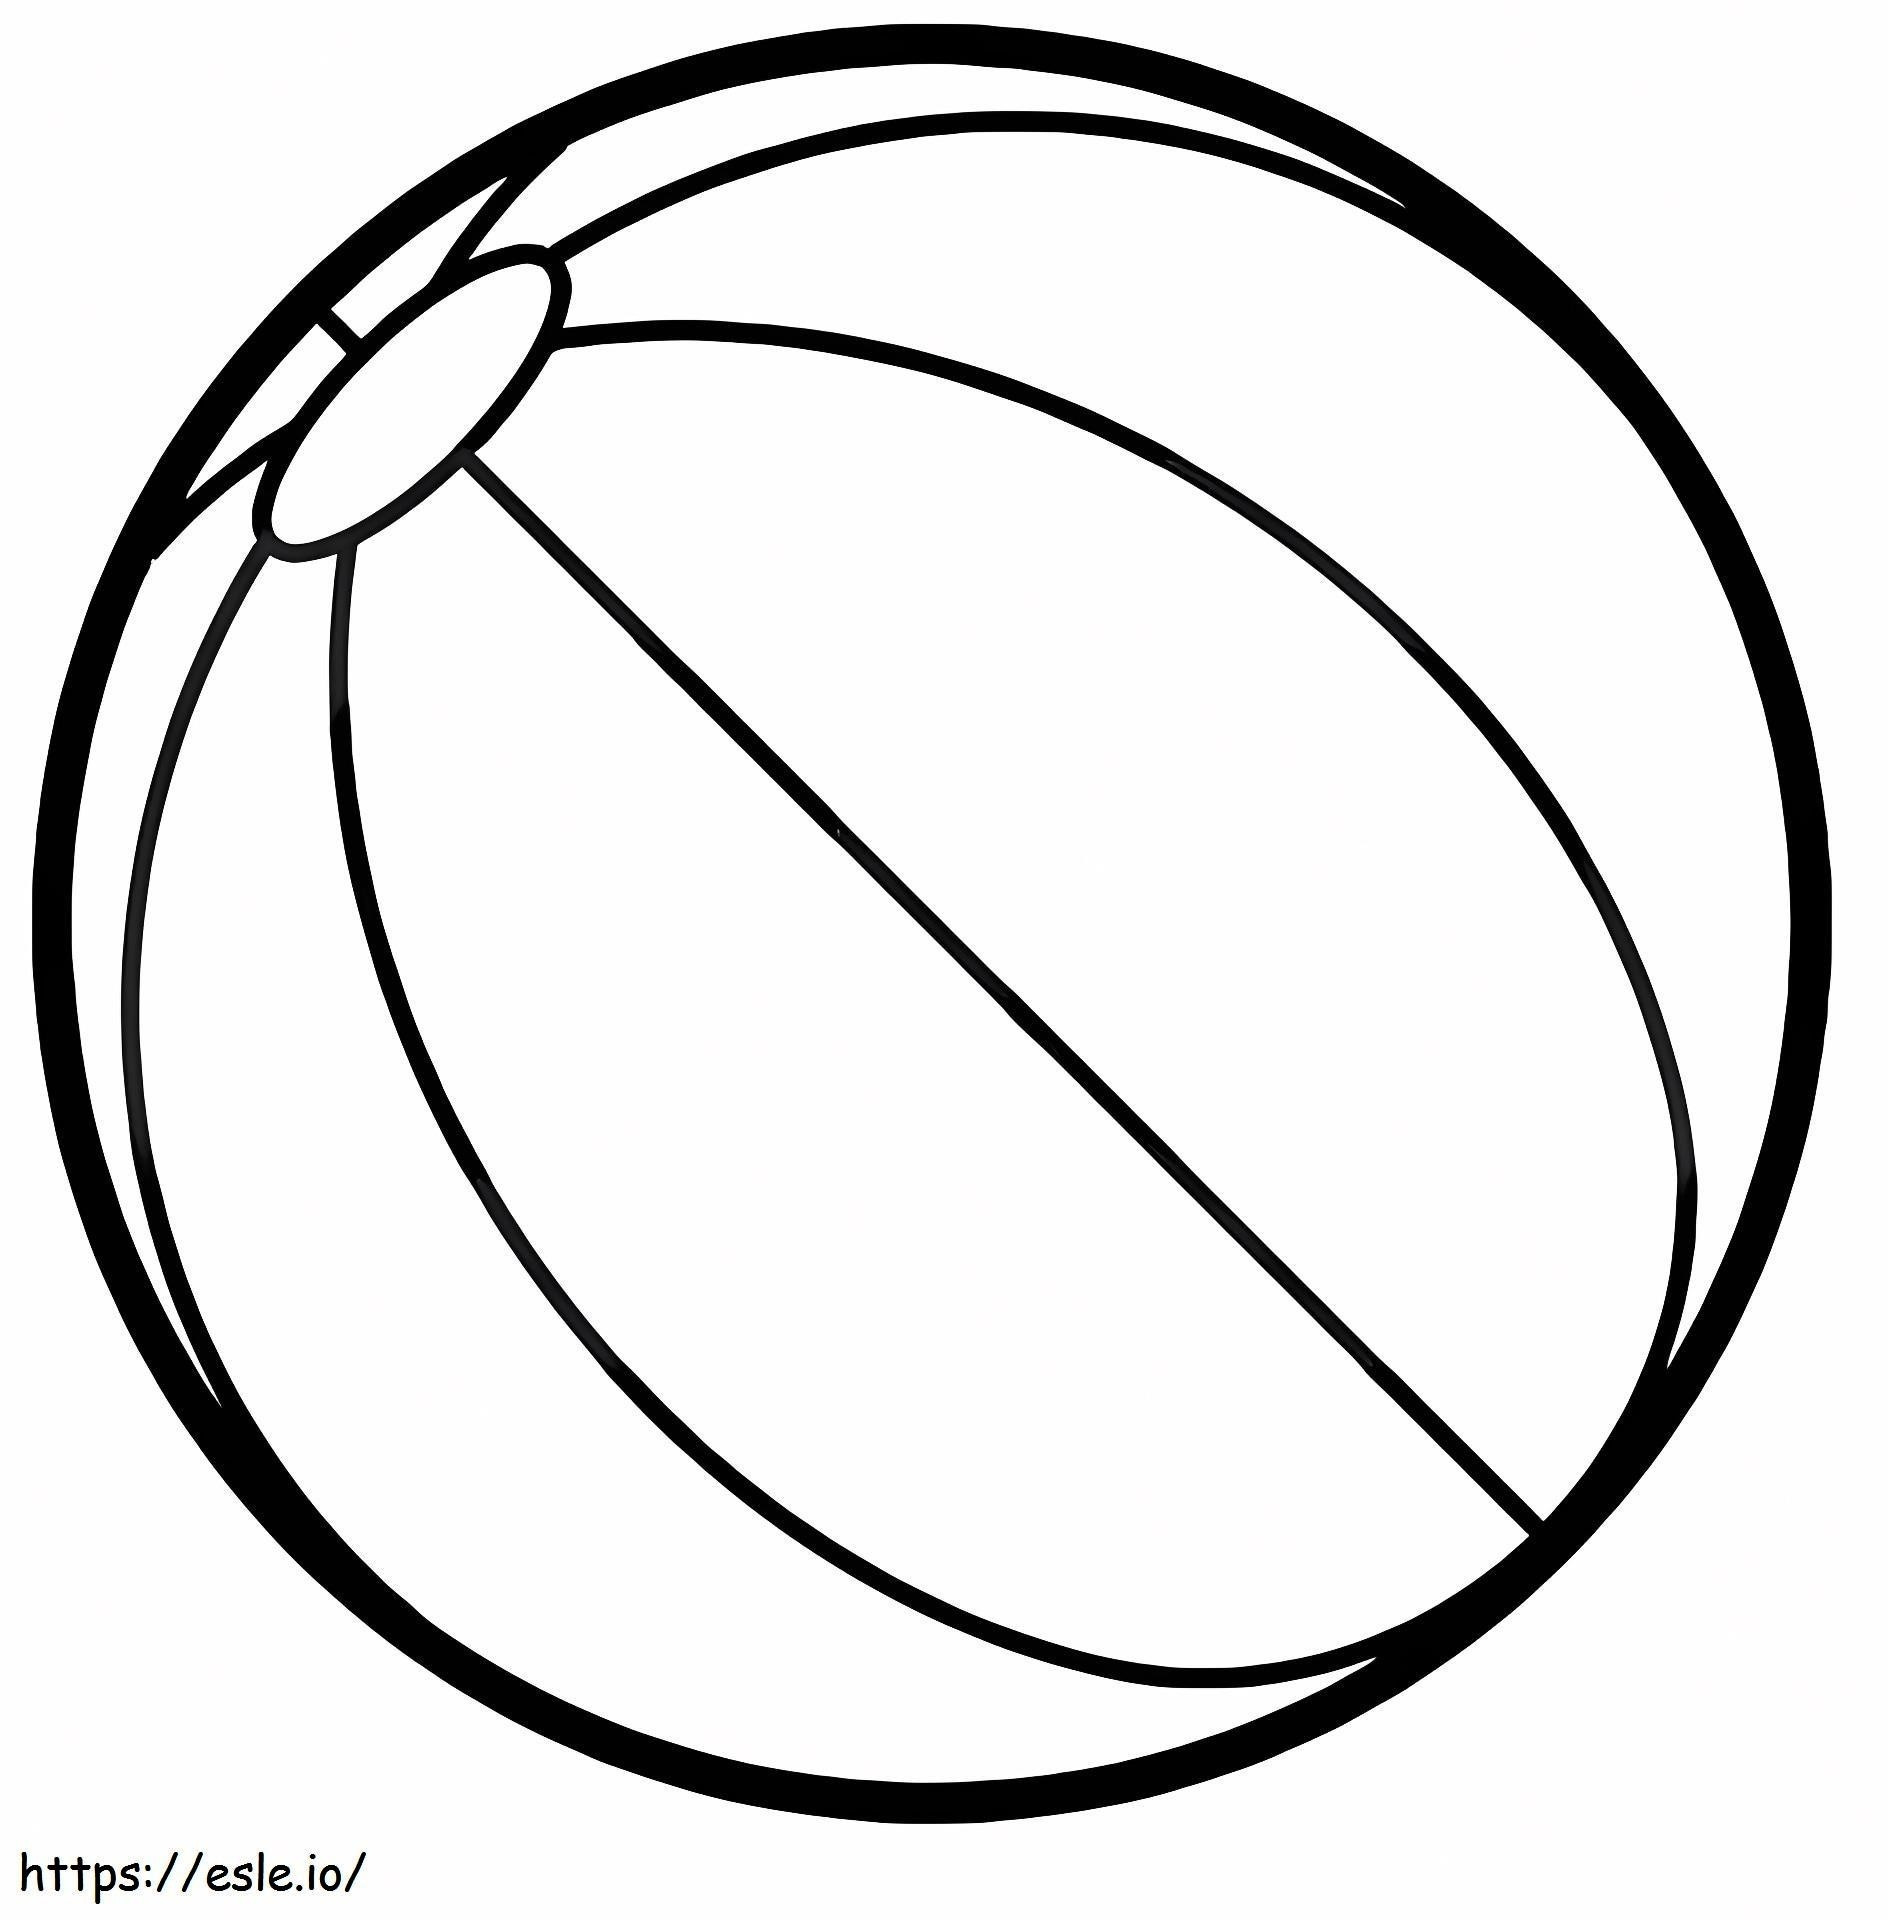 Simple Beach Ball 1 coloring page